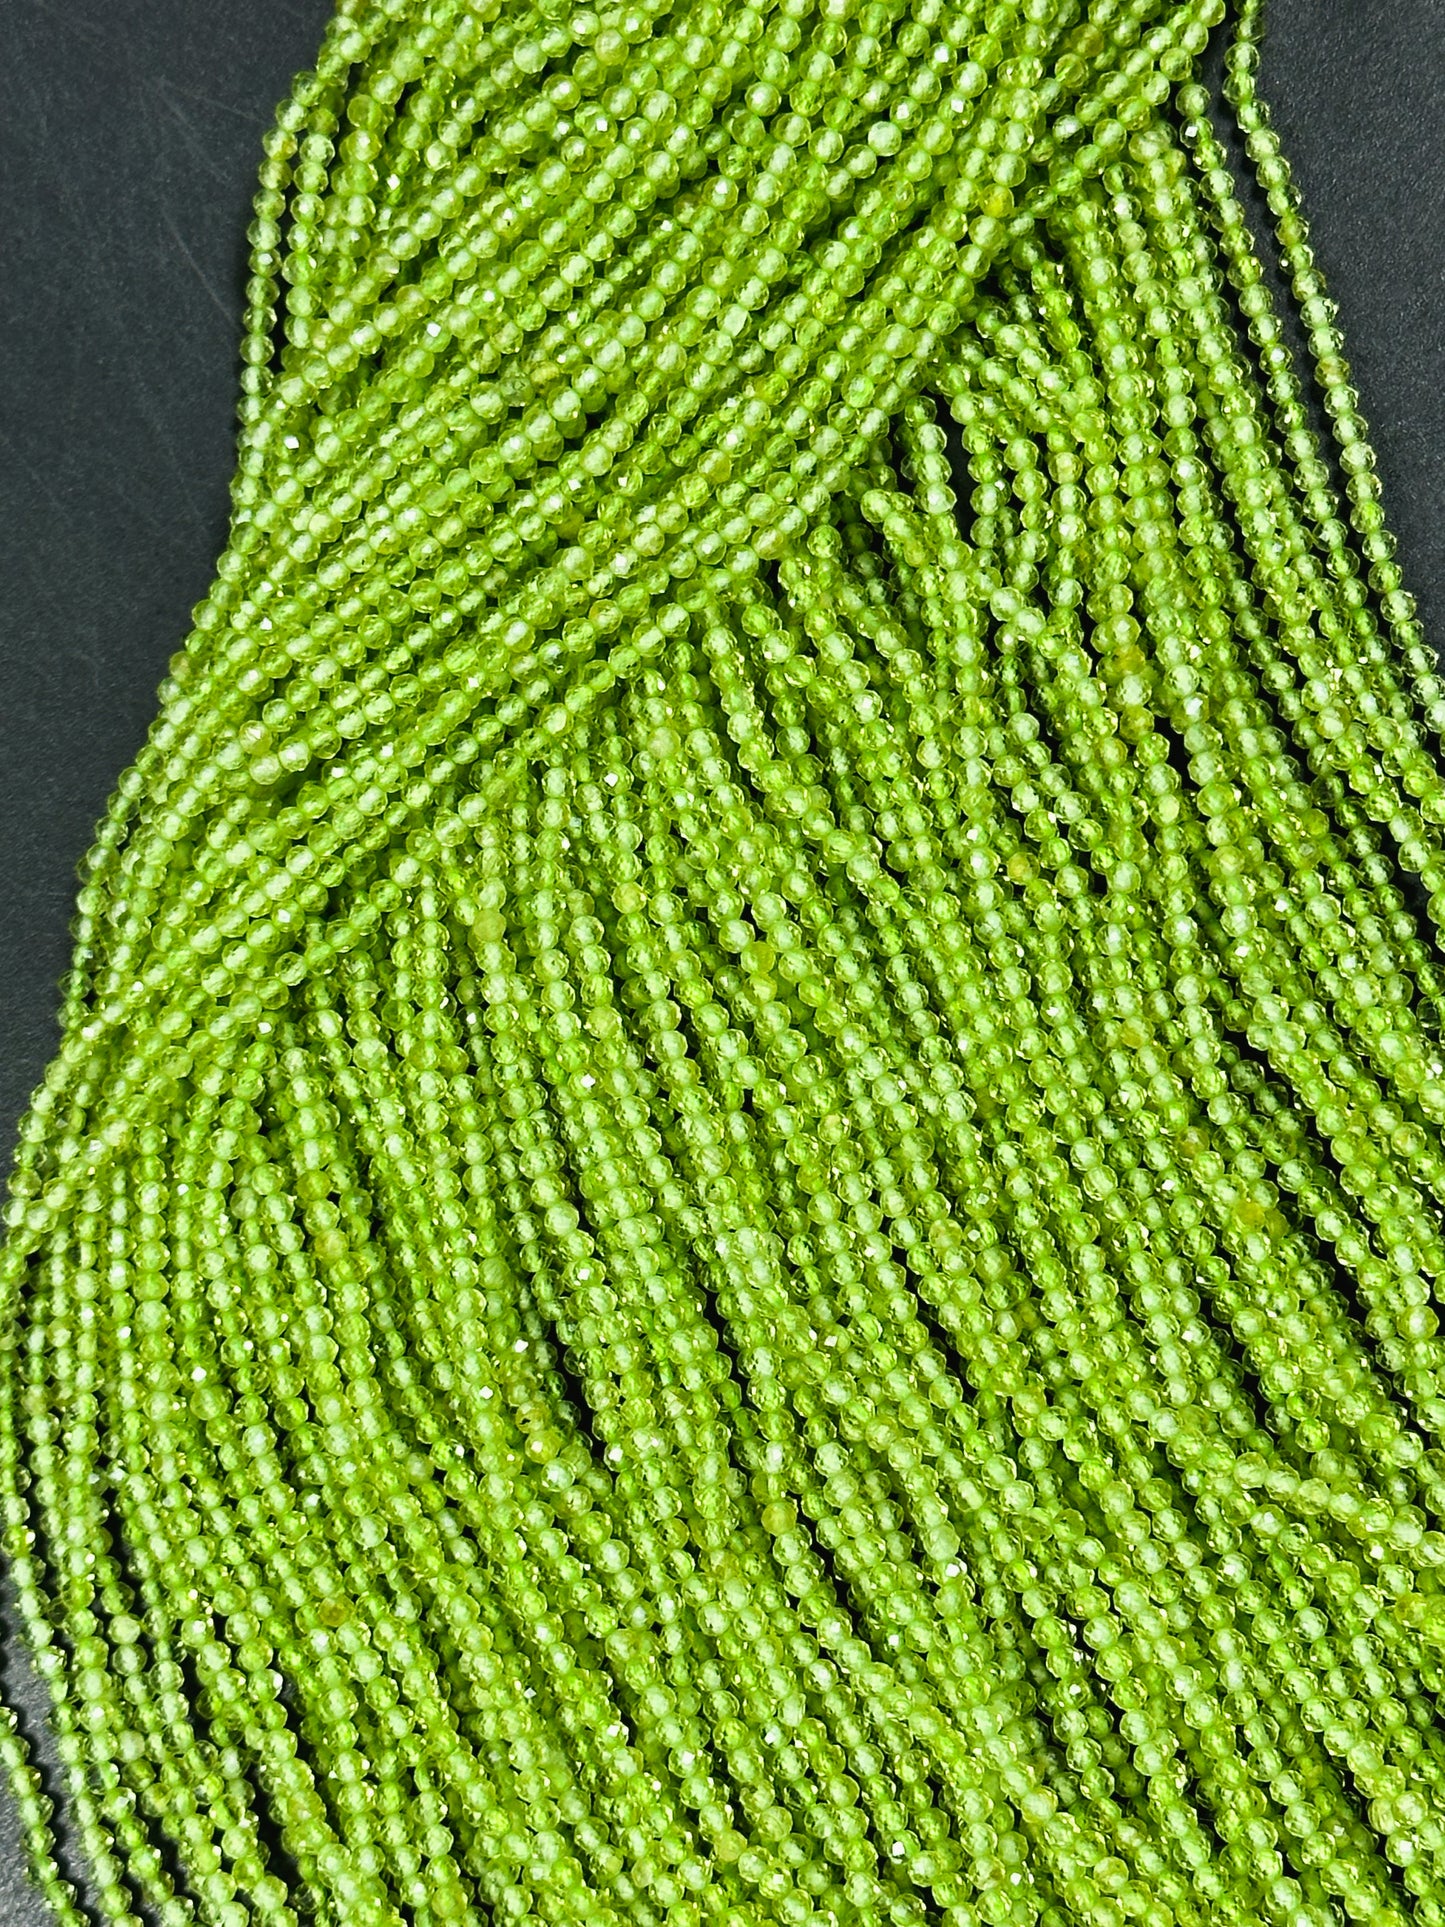 AAA NATURAL Peridot Gemstone Bead Faceted 2mm Round Bead, Beautiful Natural Green Color Peridot Gemstone Bead, Excellent Quality Beads 15.5"